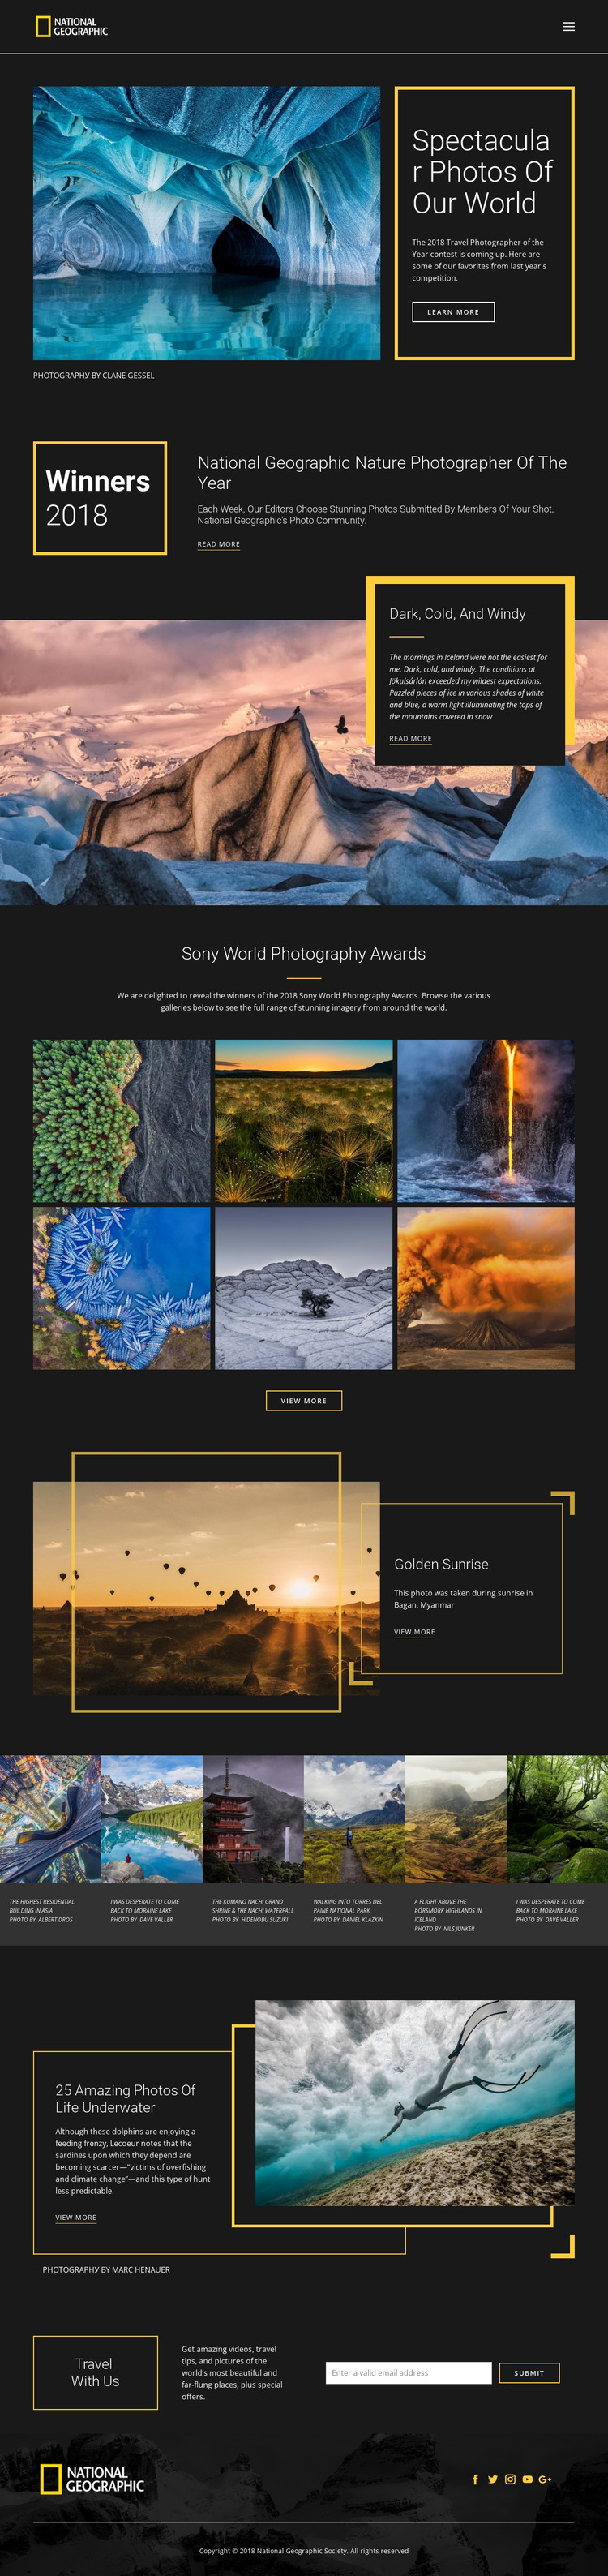 Pictures of nature HTML Template